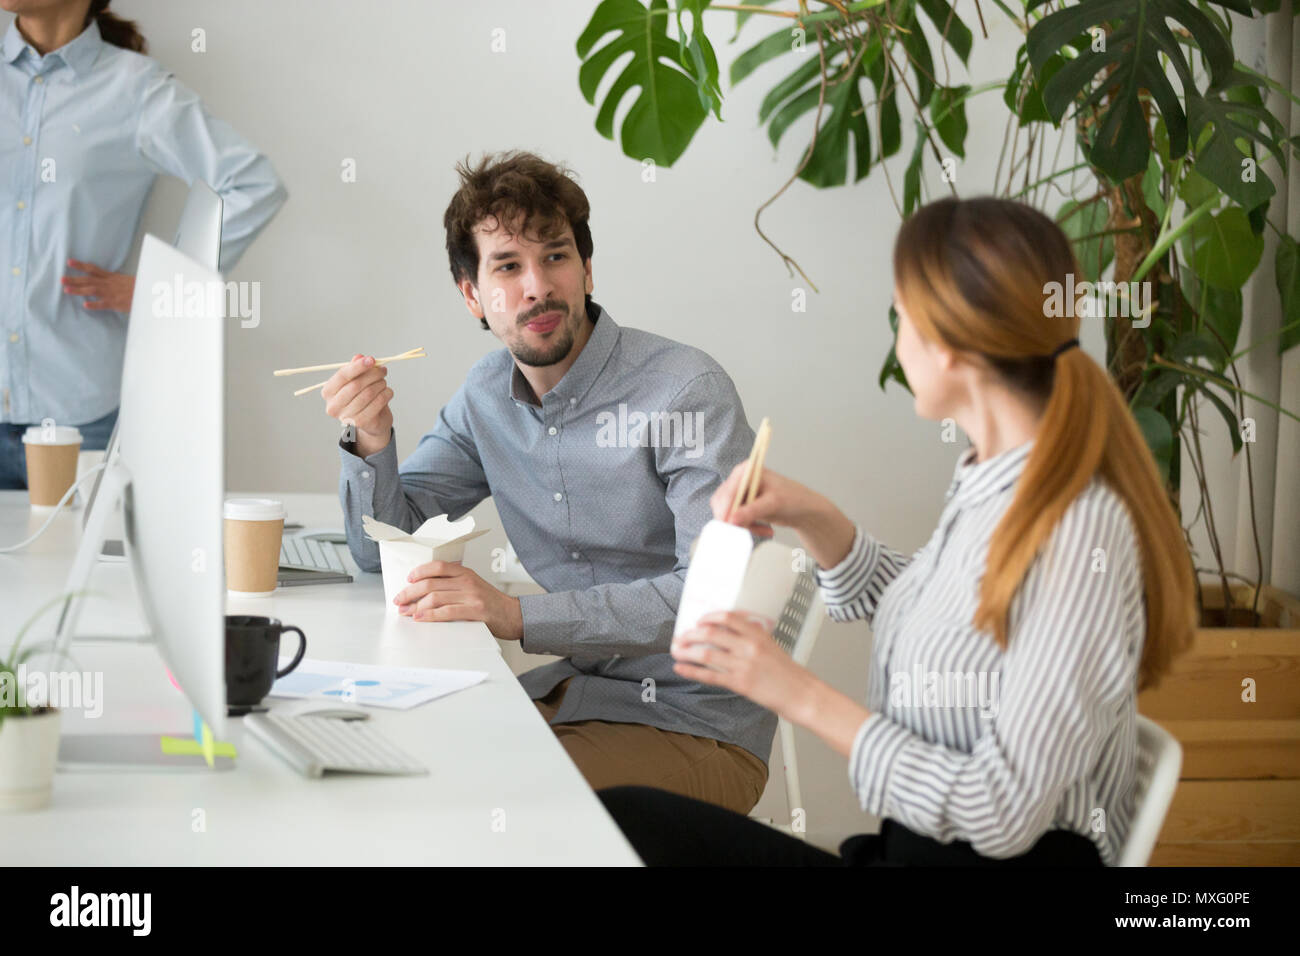 Colleagues eating Asian food from boxes during office lunch brea Stock Photo